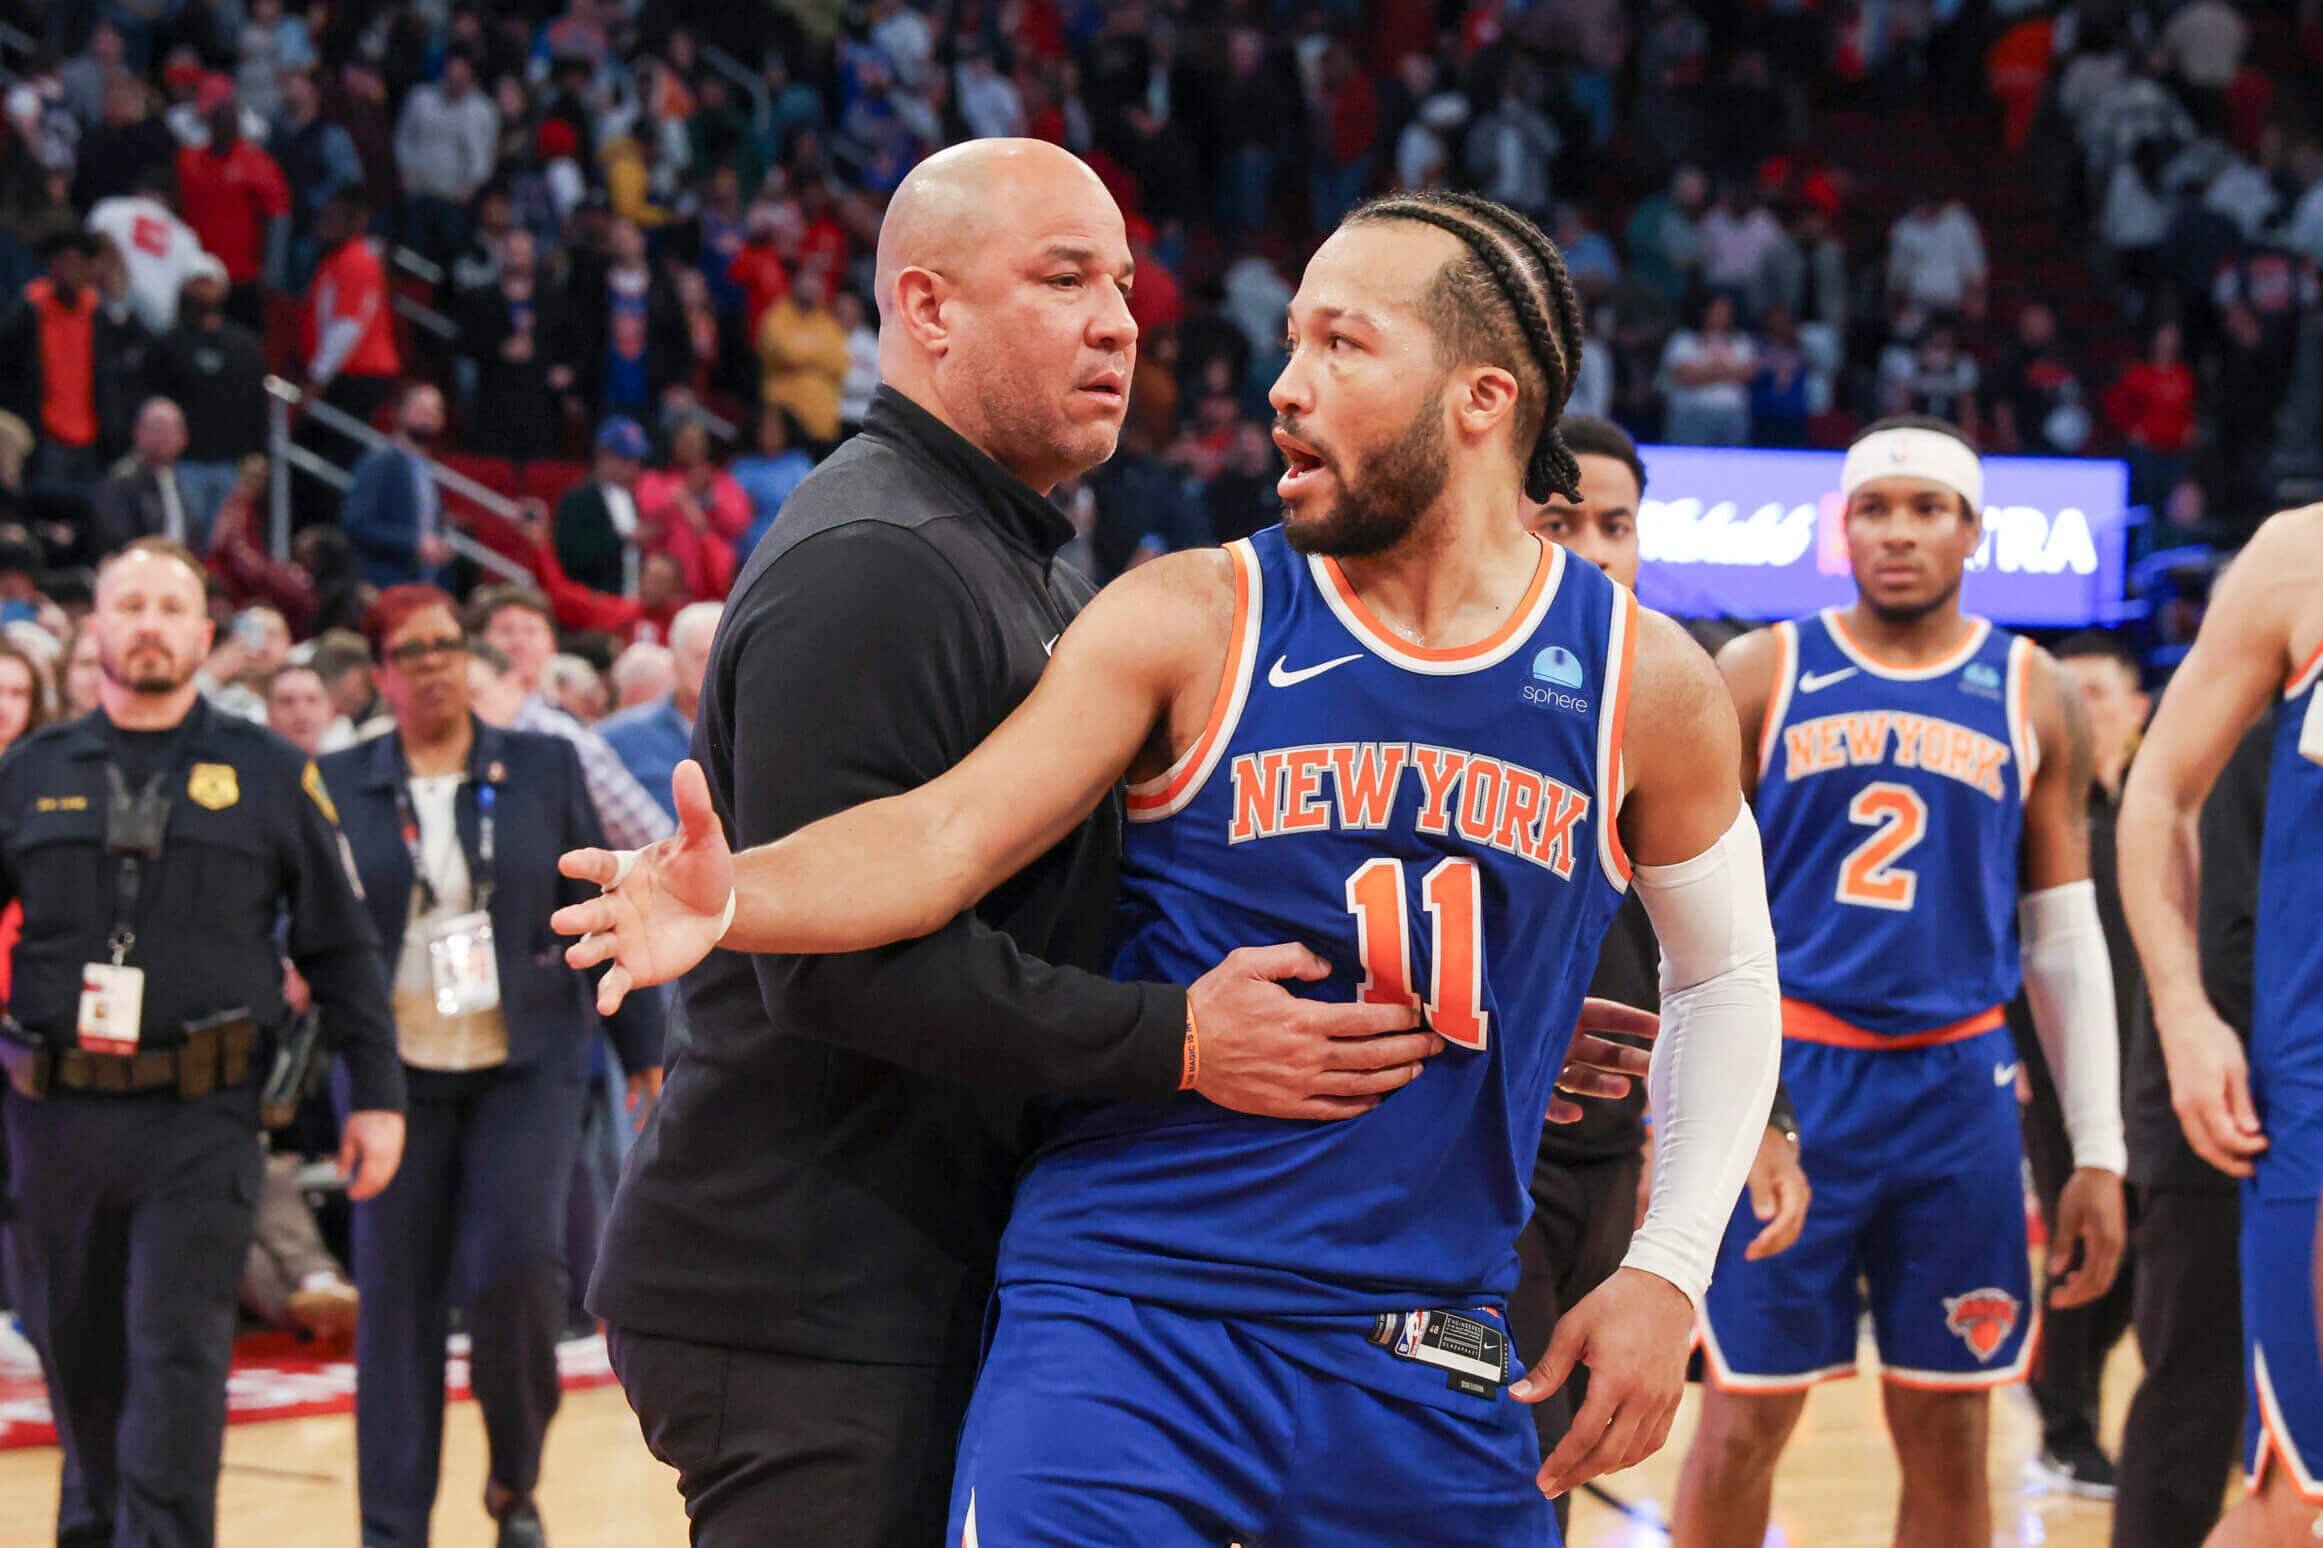 Officials admit to wrong call on final play of Knicks loss to Rockets